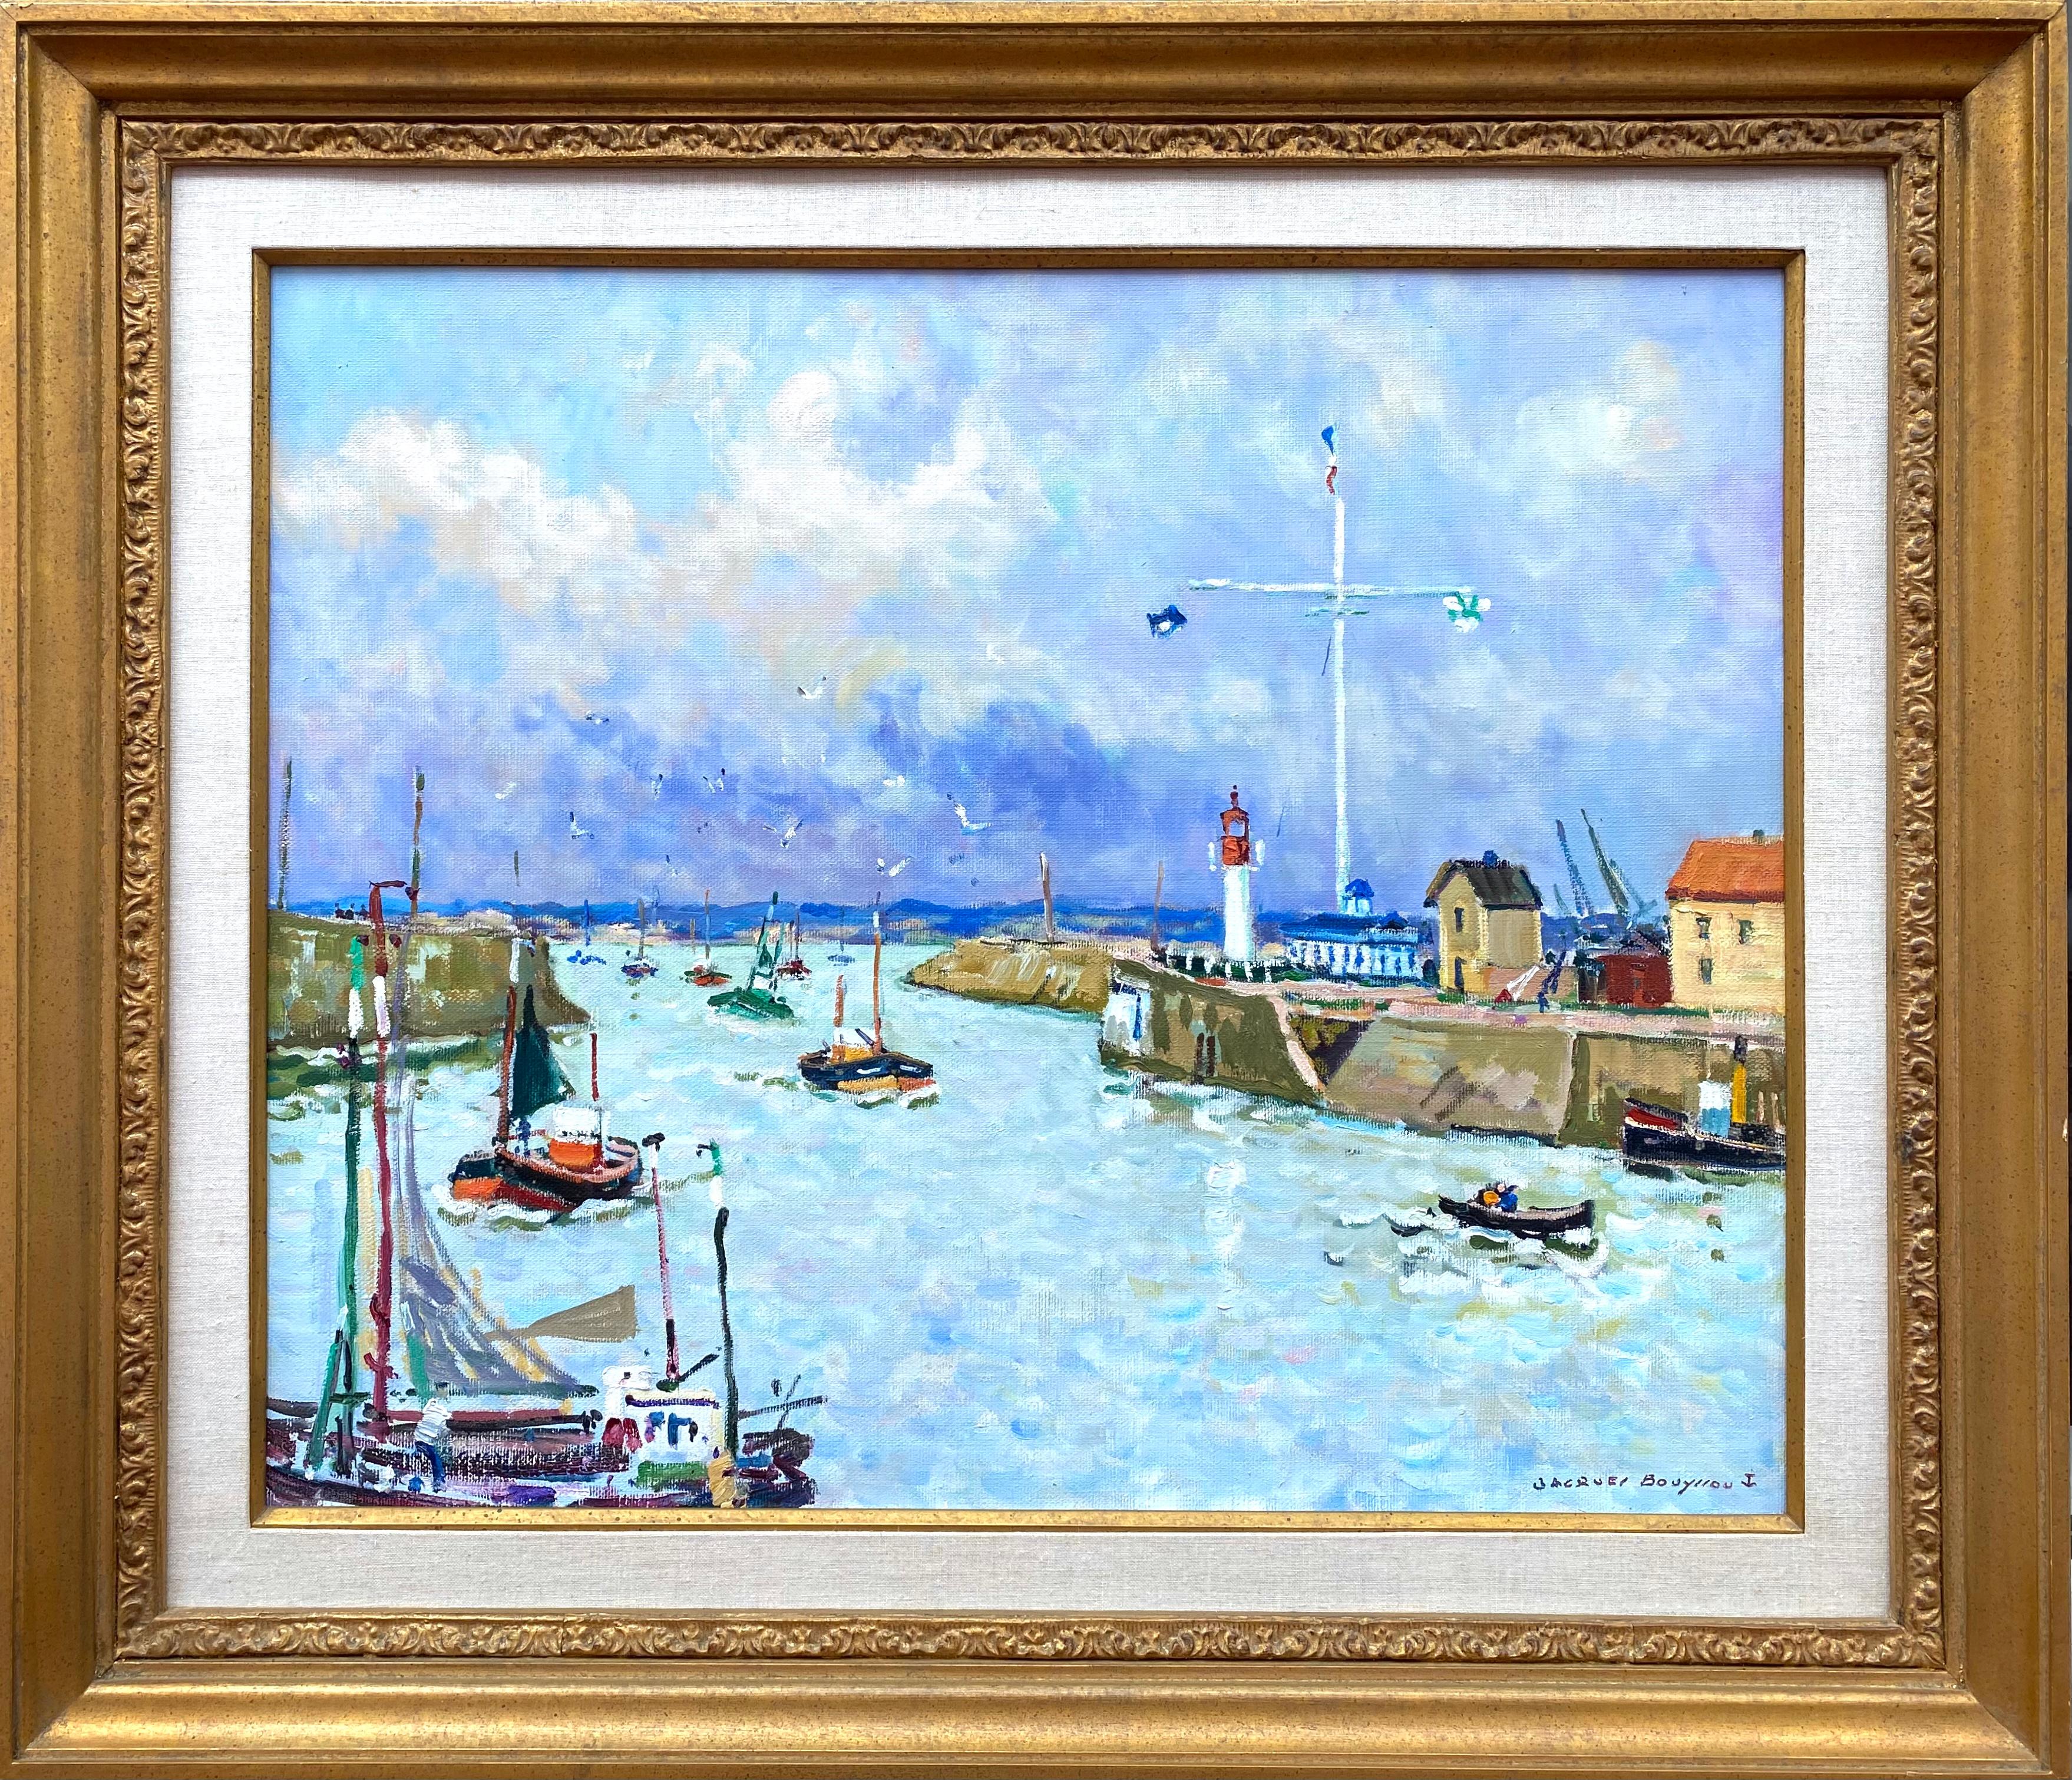 “Return of Sailboats to Honfleur” - Painting by Jacques Bouyssou